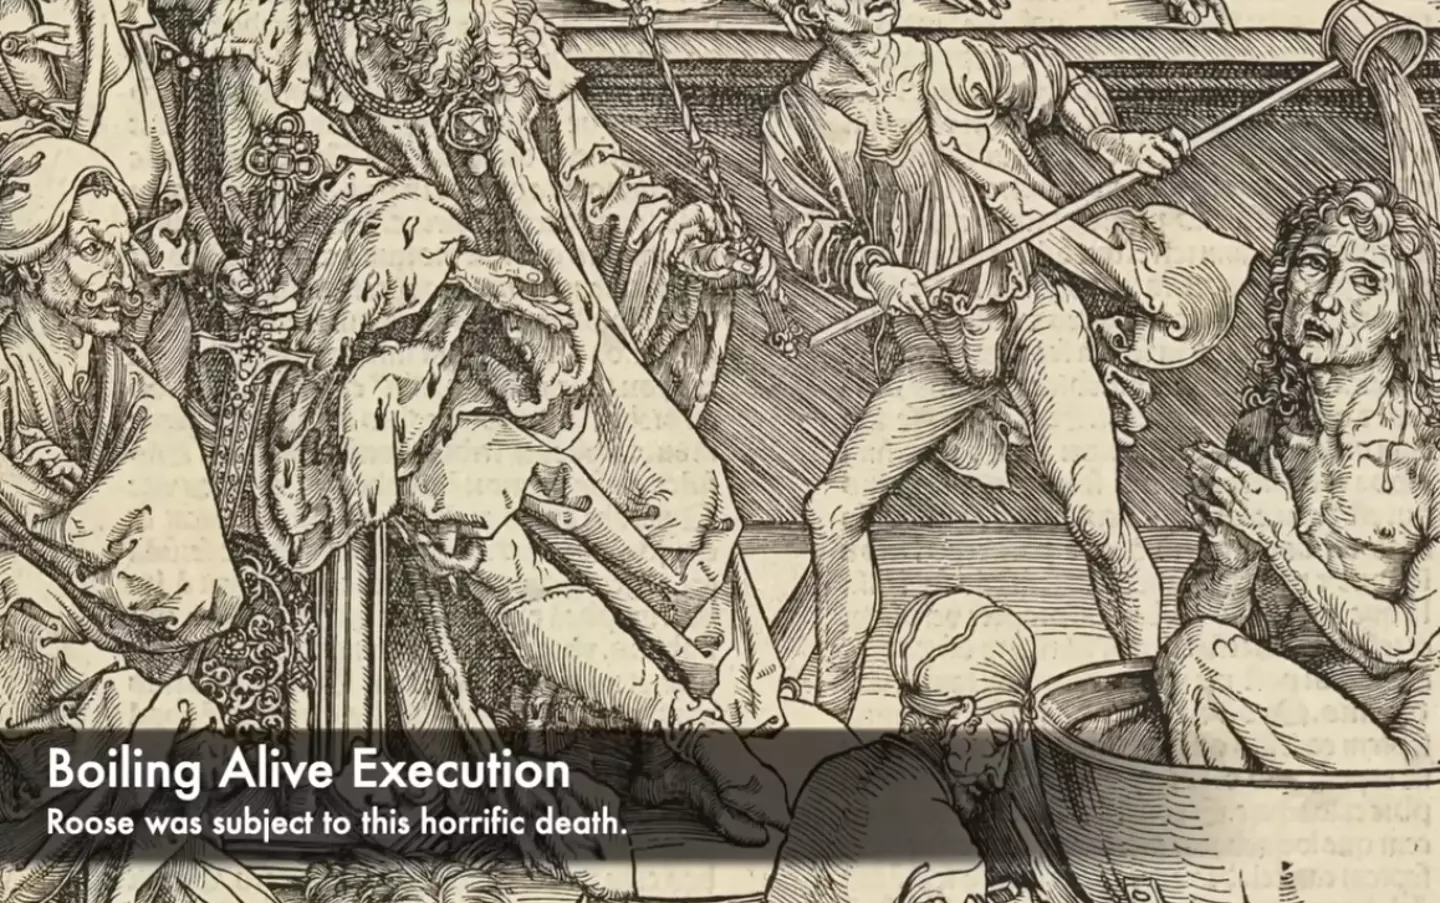 It’s been called the ‘worst’ execution method ever.